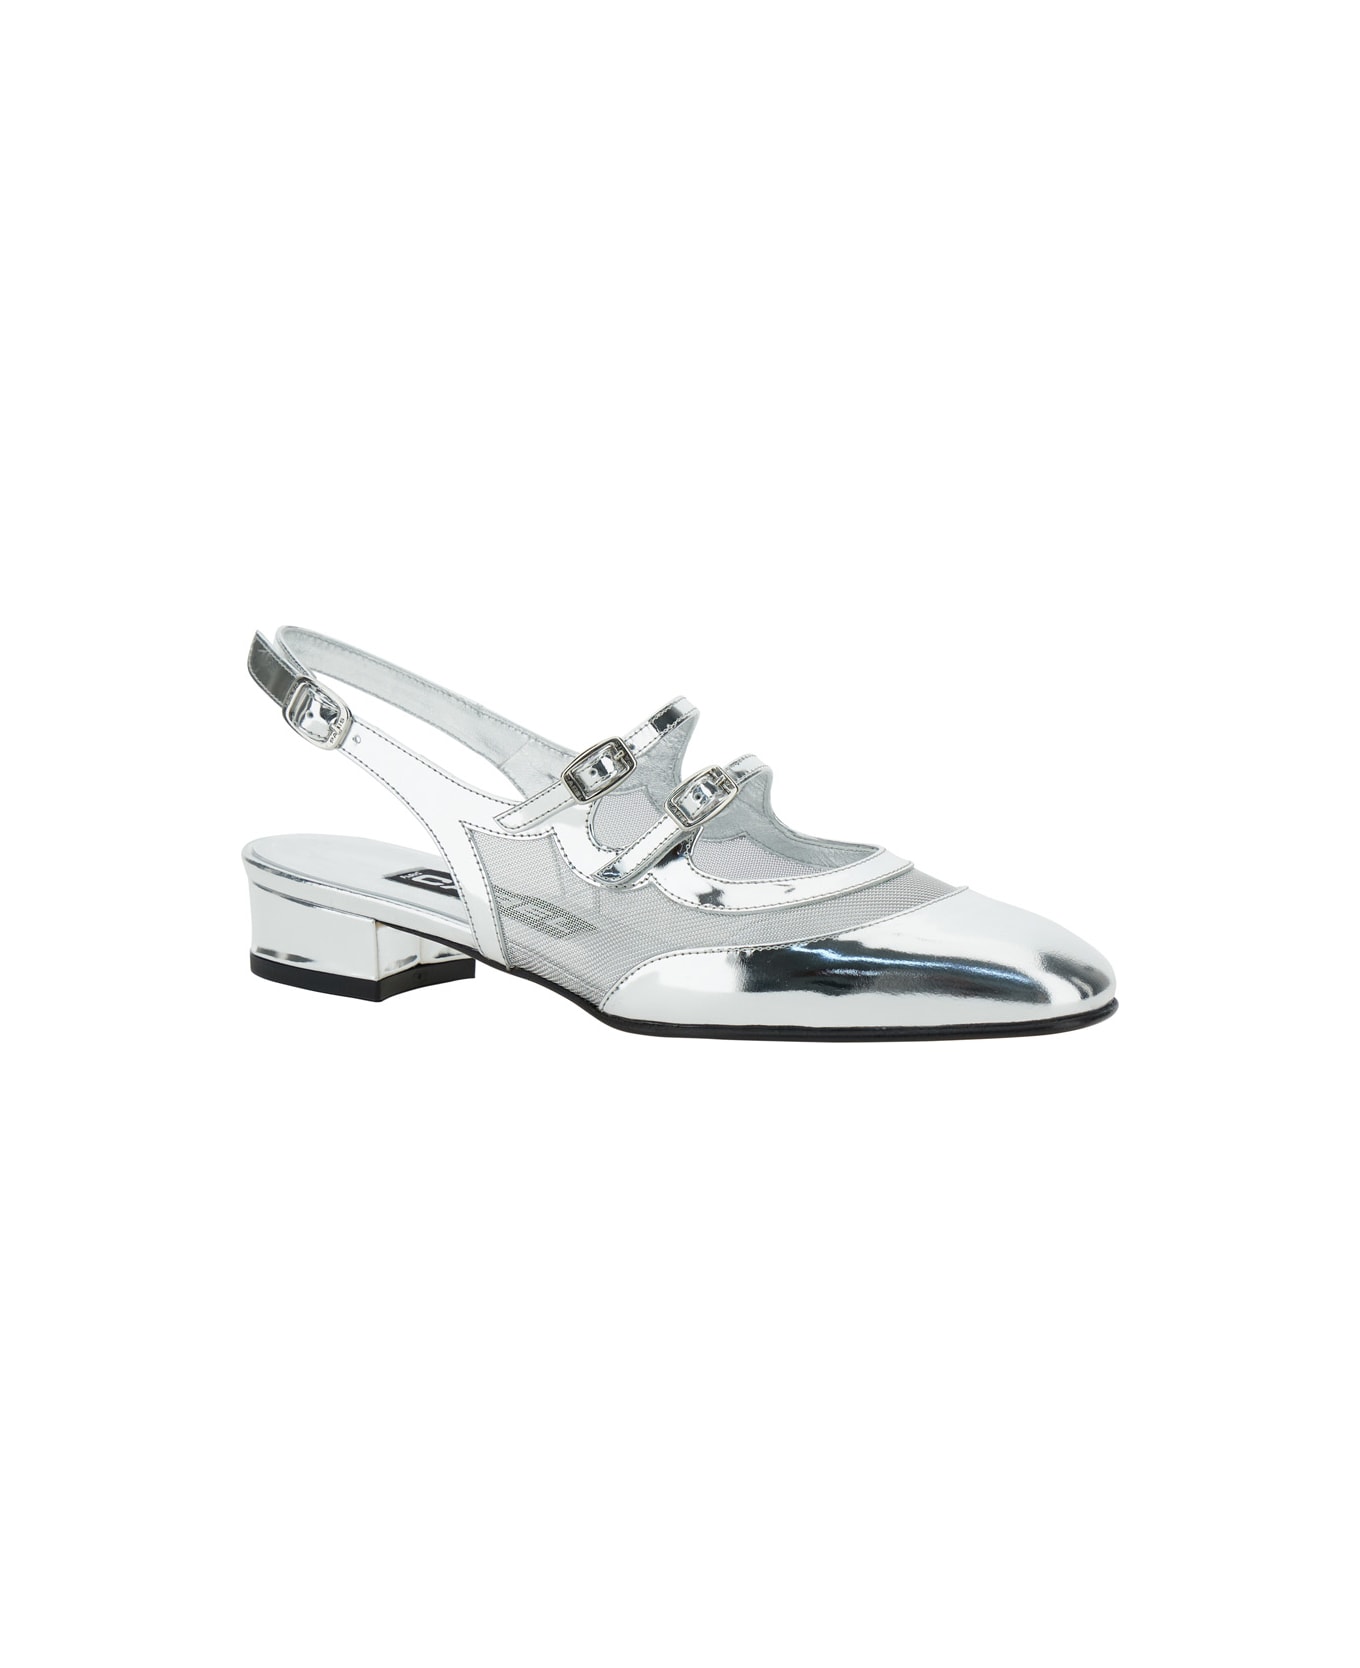 Carel Silver Mary Jane With Straps In Patent Leather Woman - Metallic フラットシューズ